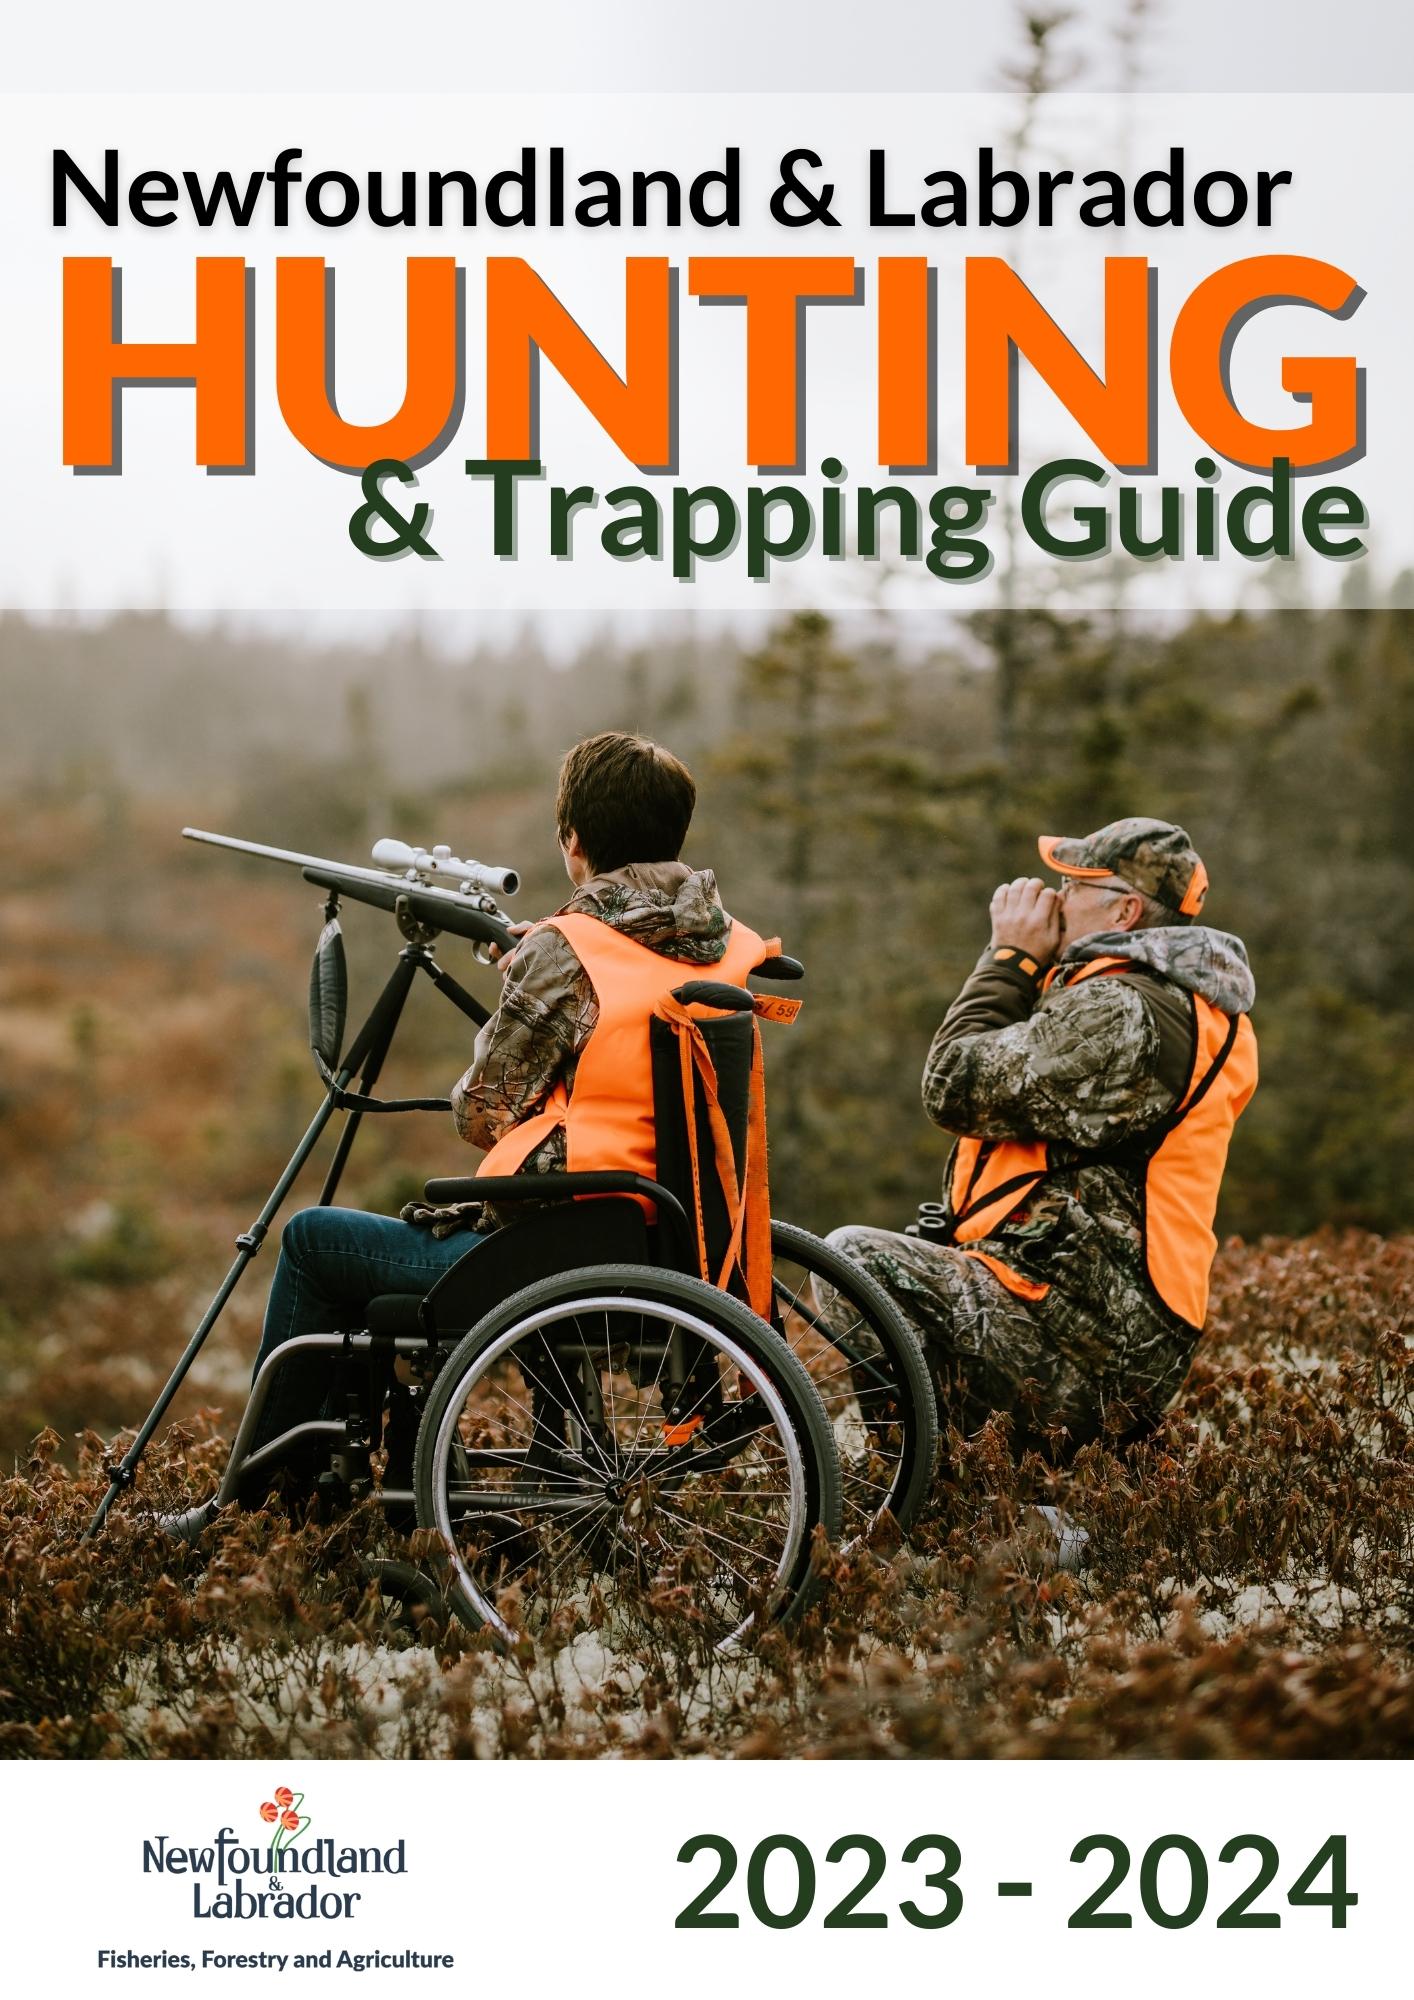 https://www.gov.nl.ca/hunting-trapping-guide/wp-content/uploads/Hunting-Trapping-2023-34-ONLINE.jpg